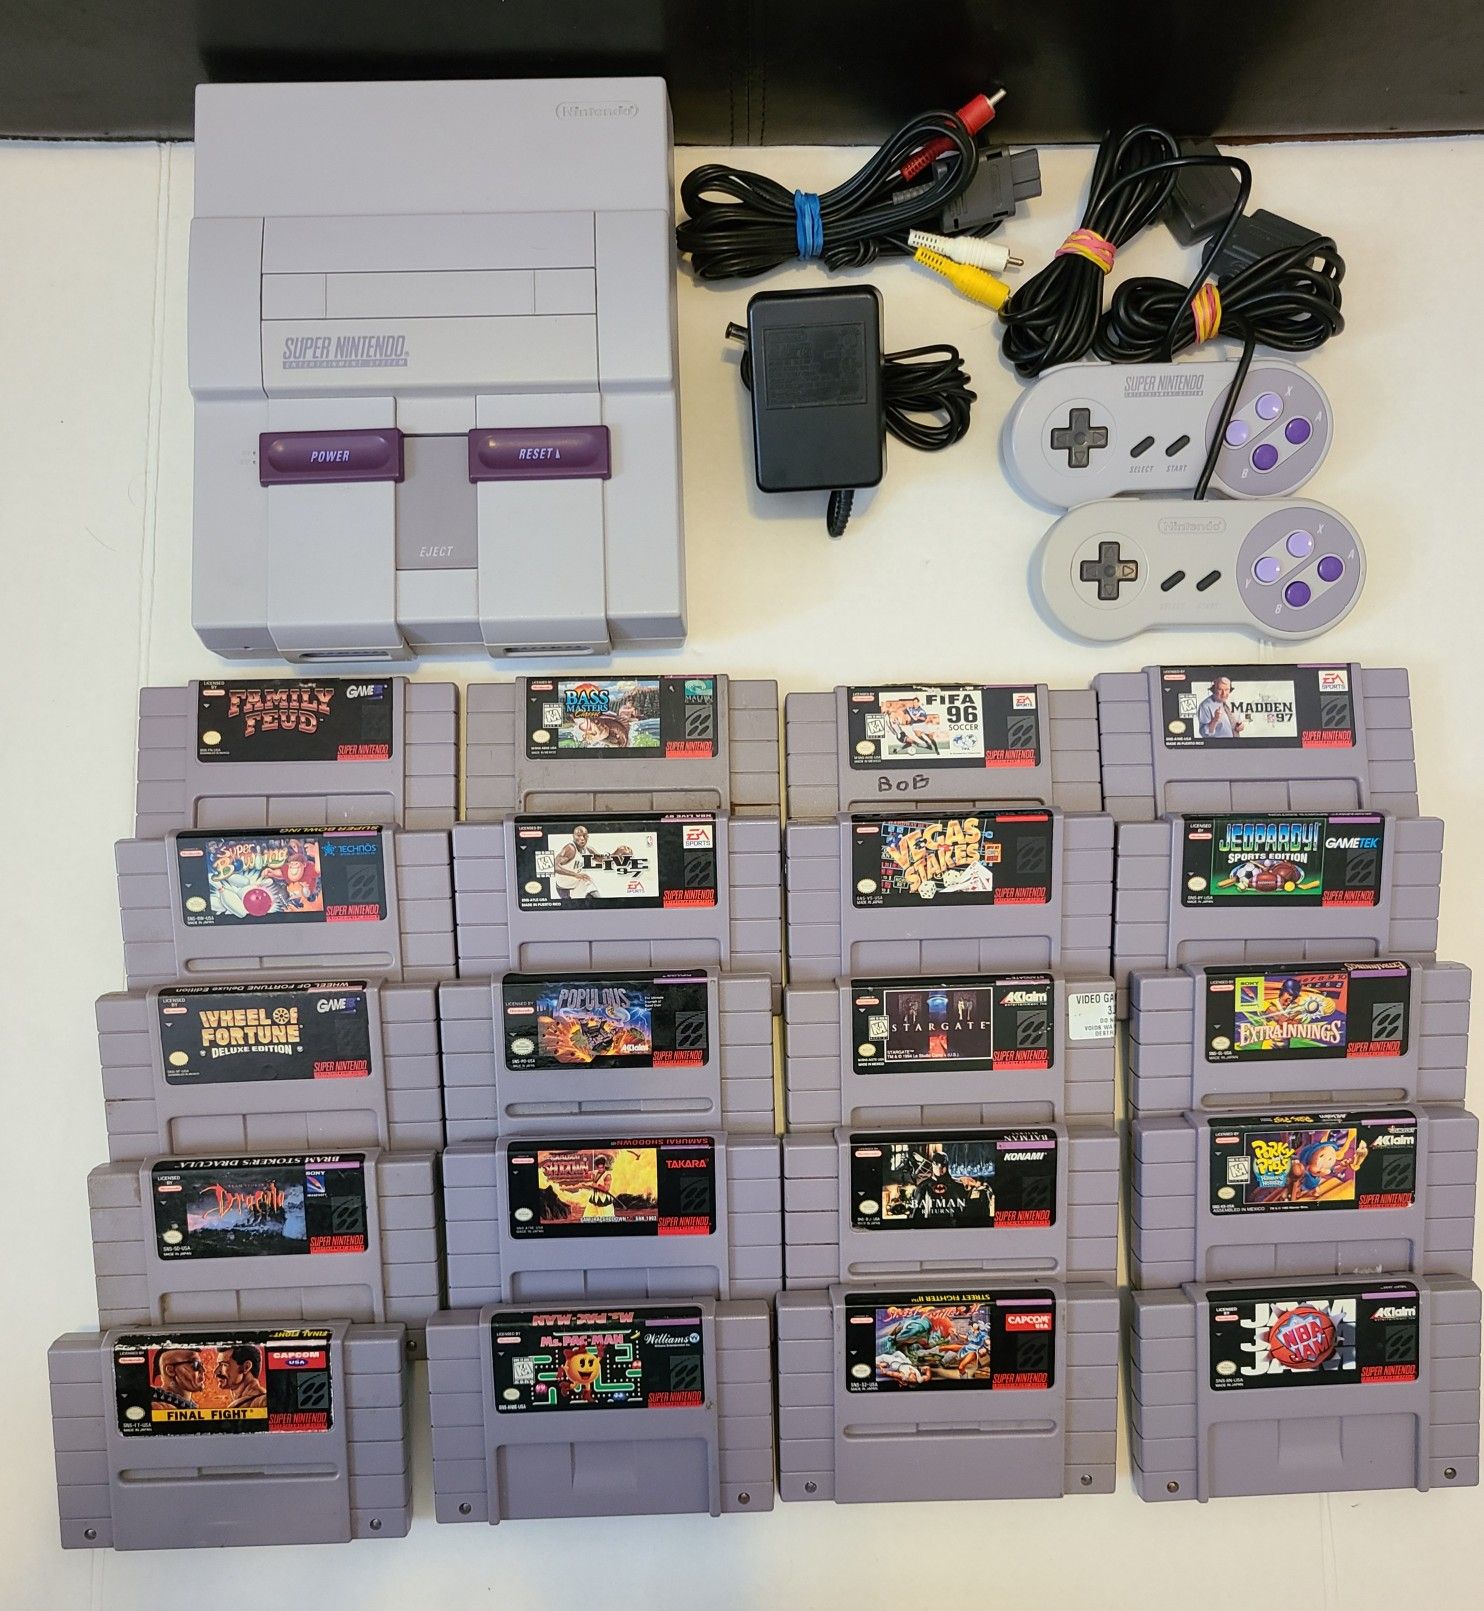 Super nintendo with 20 games!!!